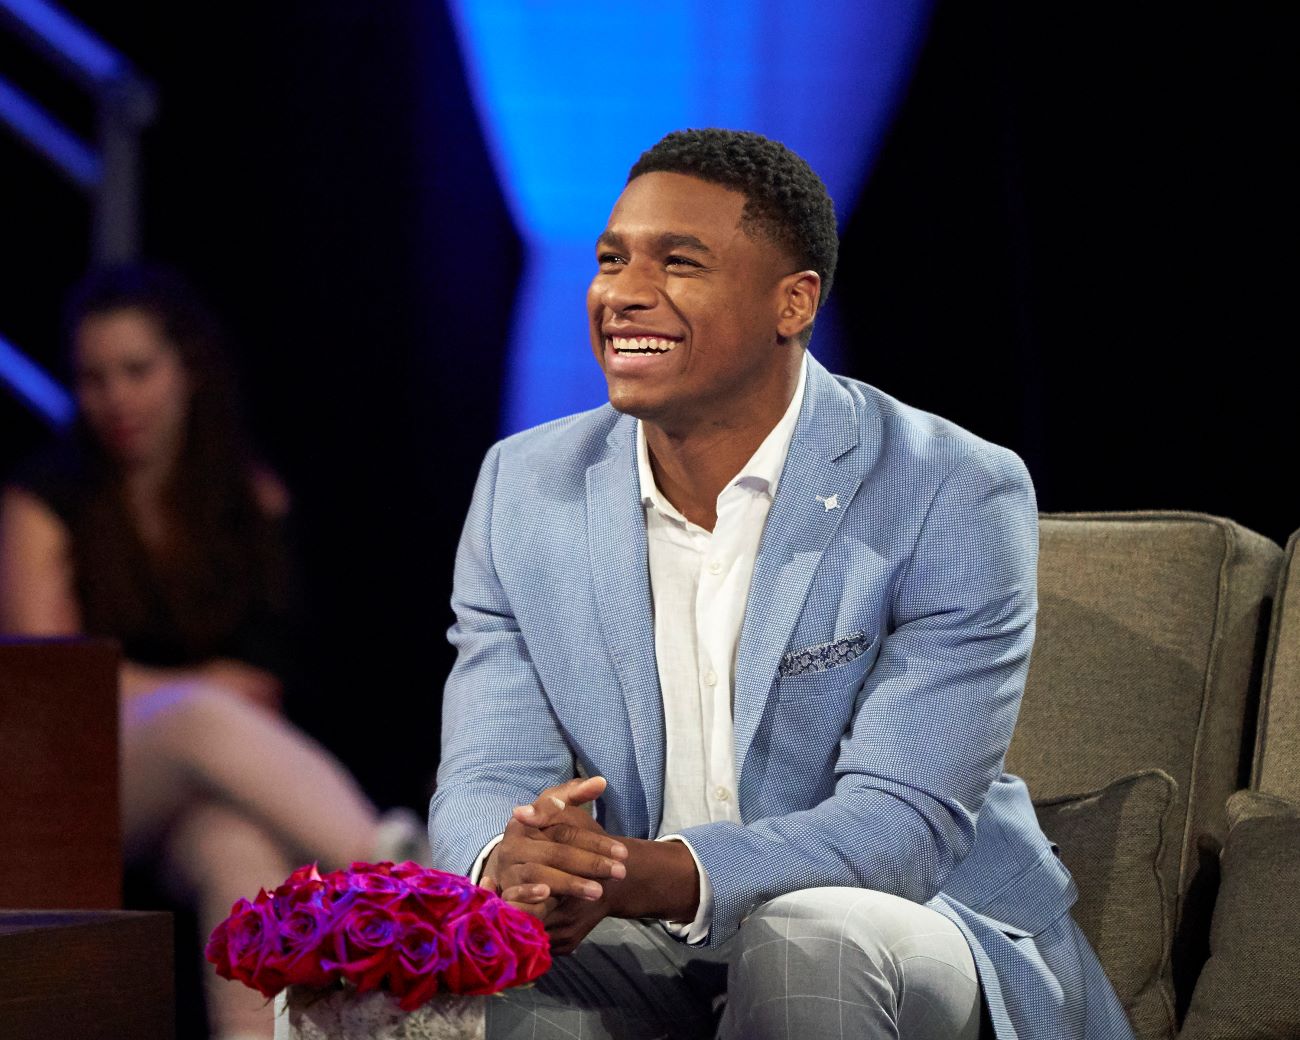 Andrew Spencer on 'The Bachelorette' in a light blue suit with white undershirt